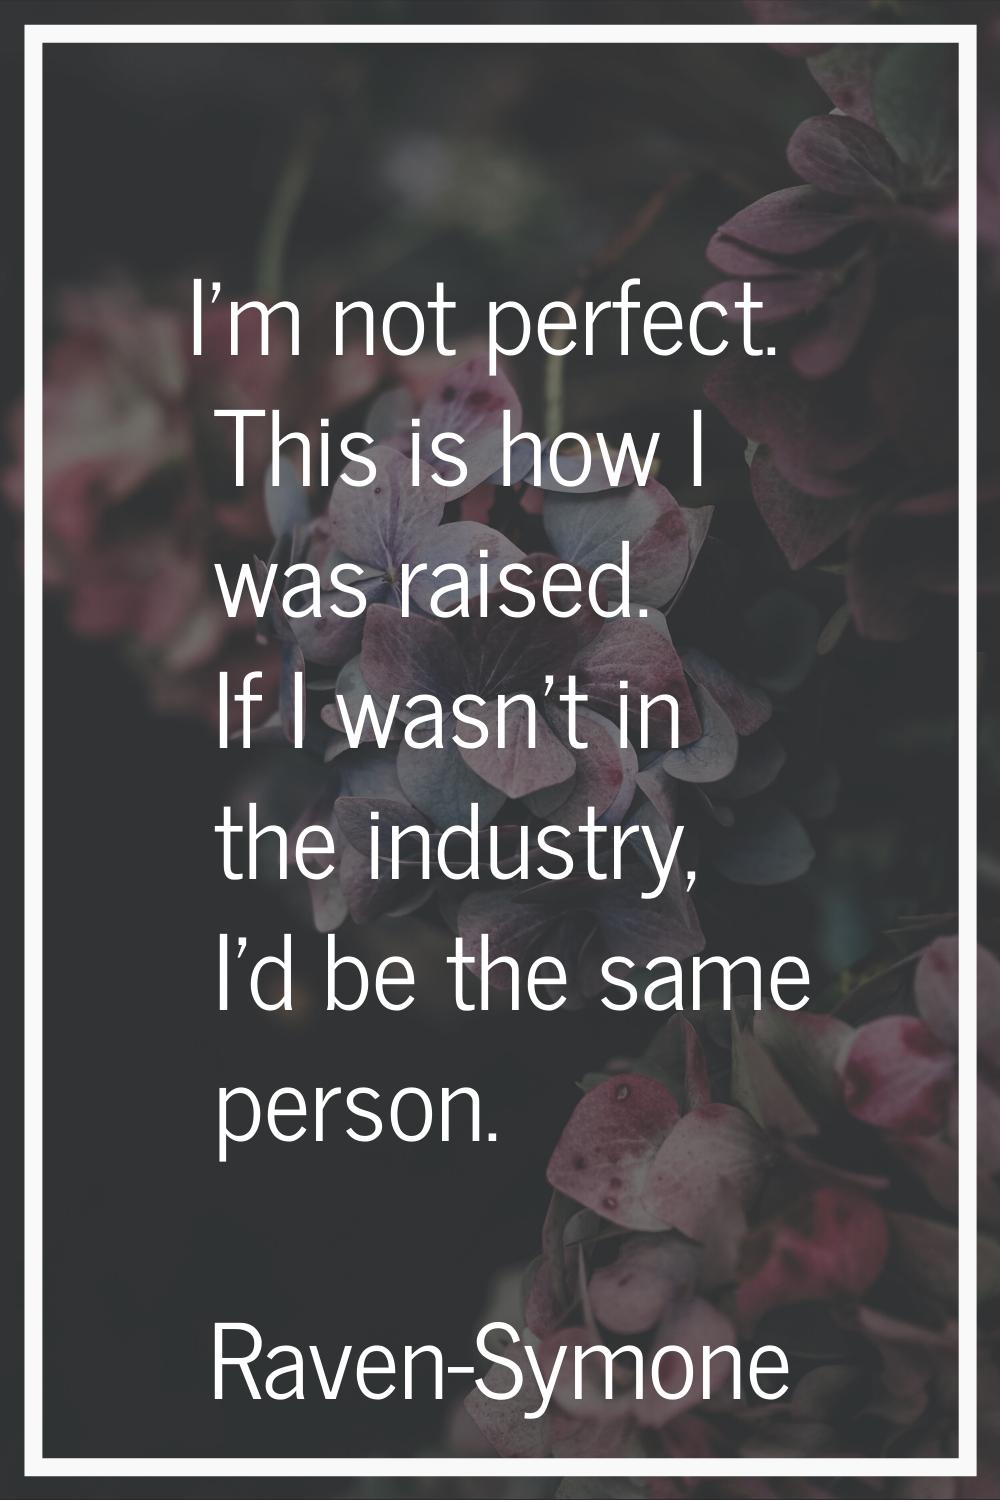 I'm not perfect. This is how I was raised. If I wasn't in the industry, I'd be the same person.